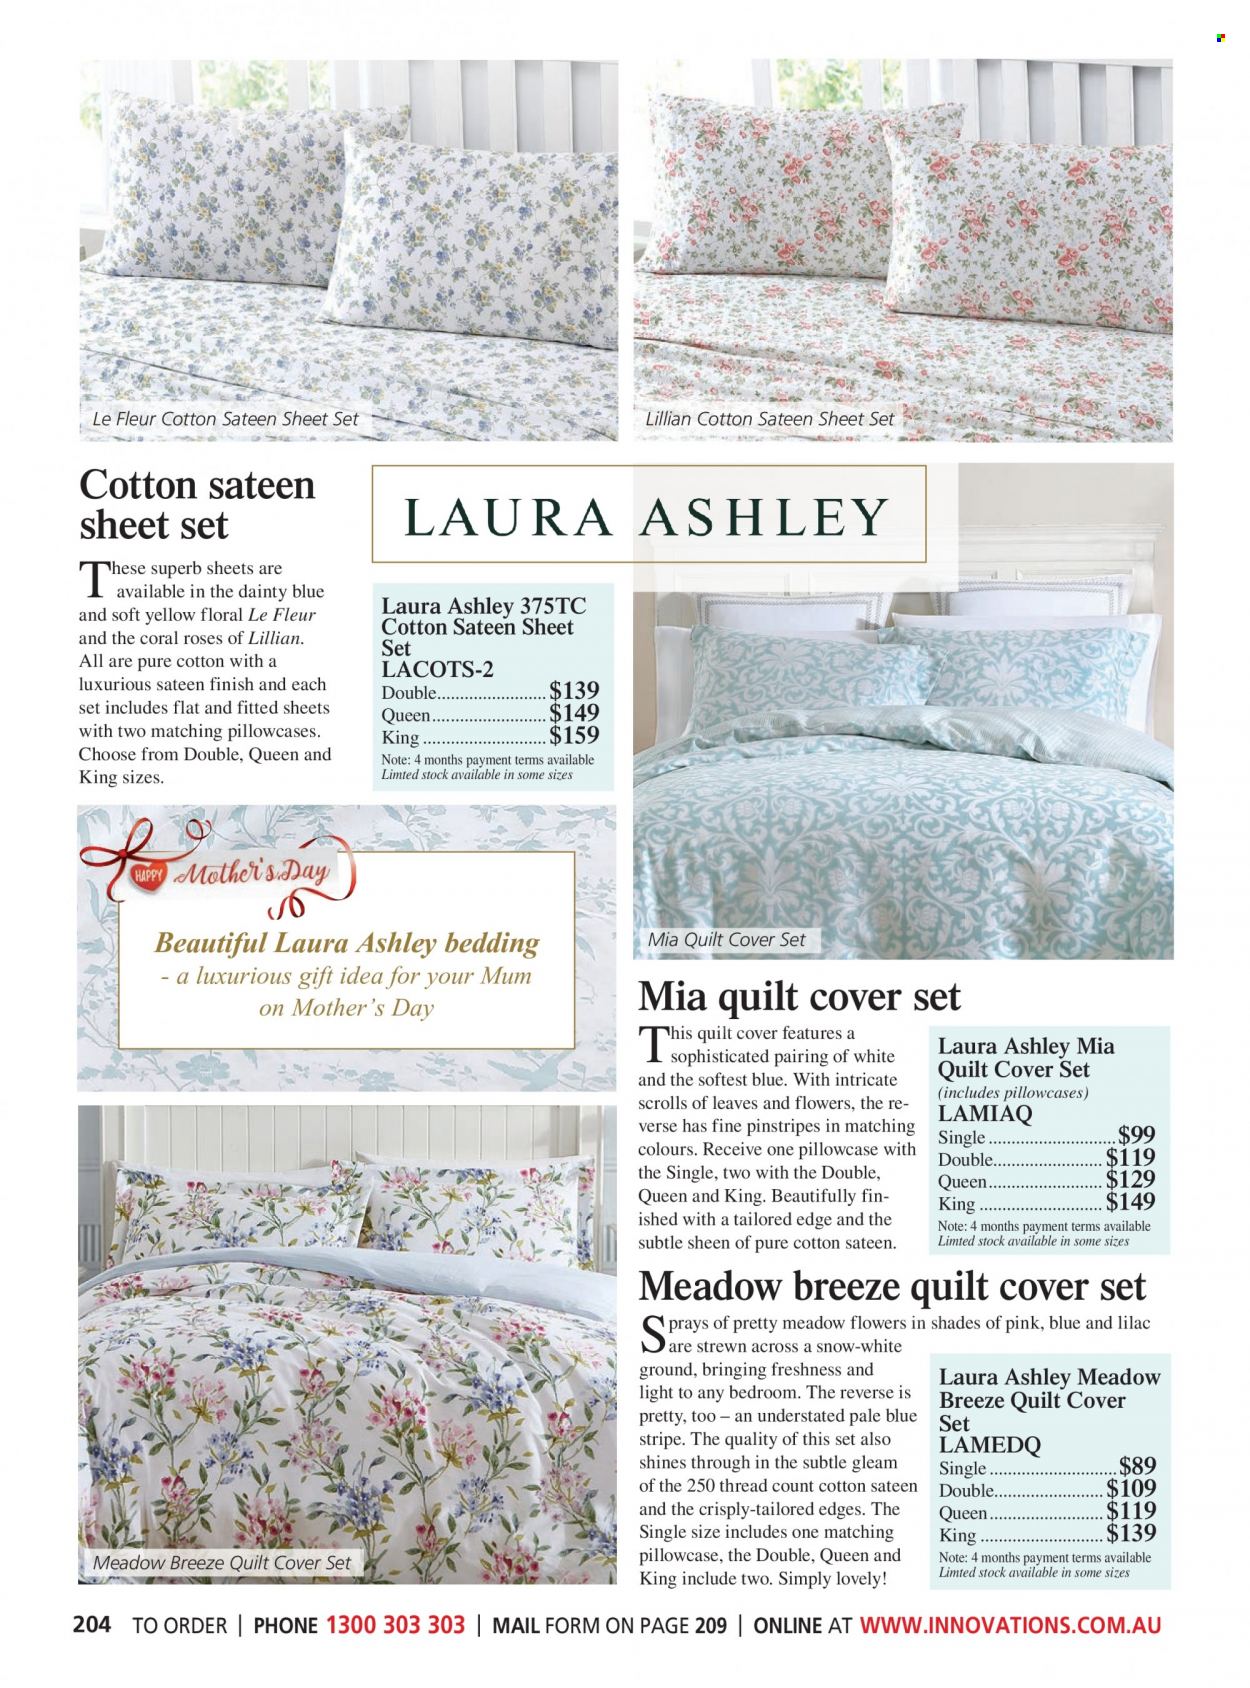 thumbnail - Innovations Catalogue - Sales products - bedding, pillowcase, quilt, quilt cover set. Page 204.